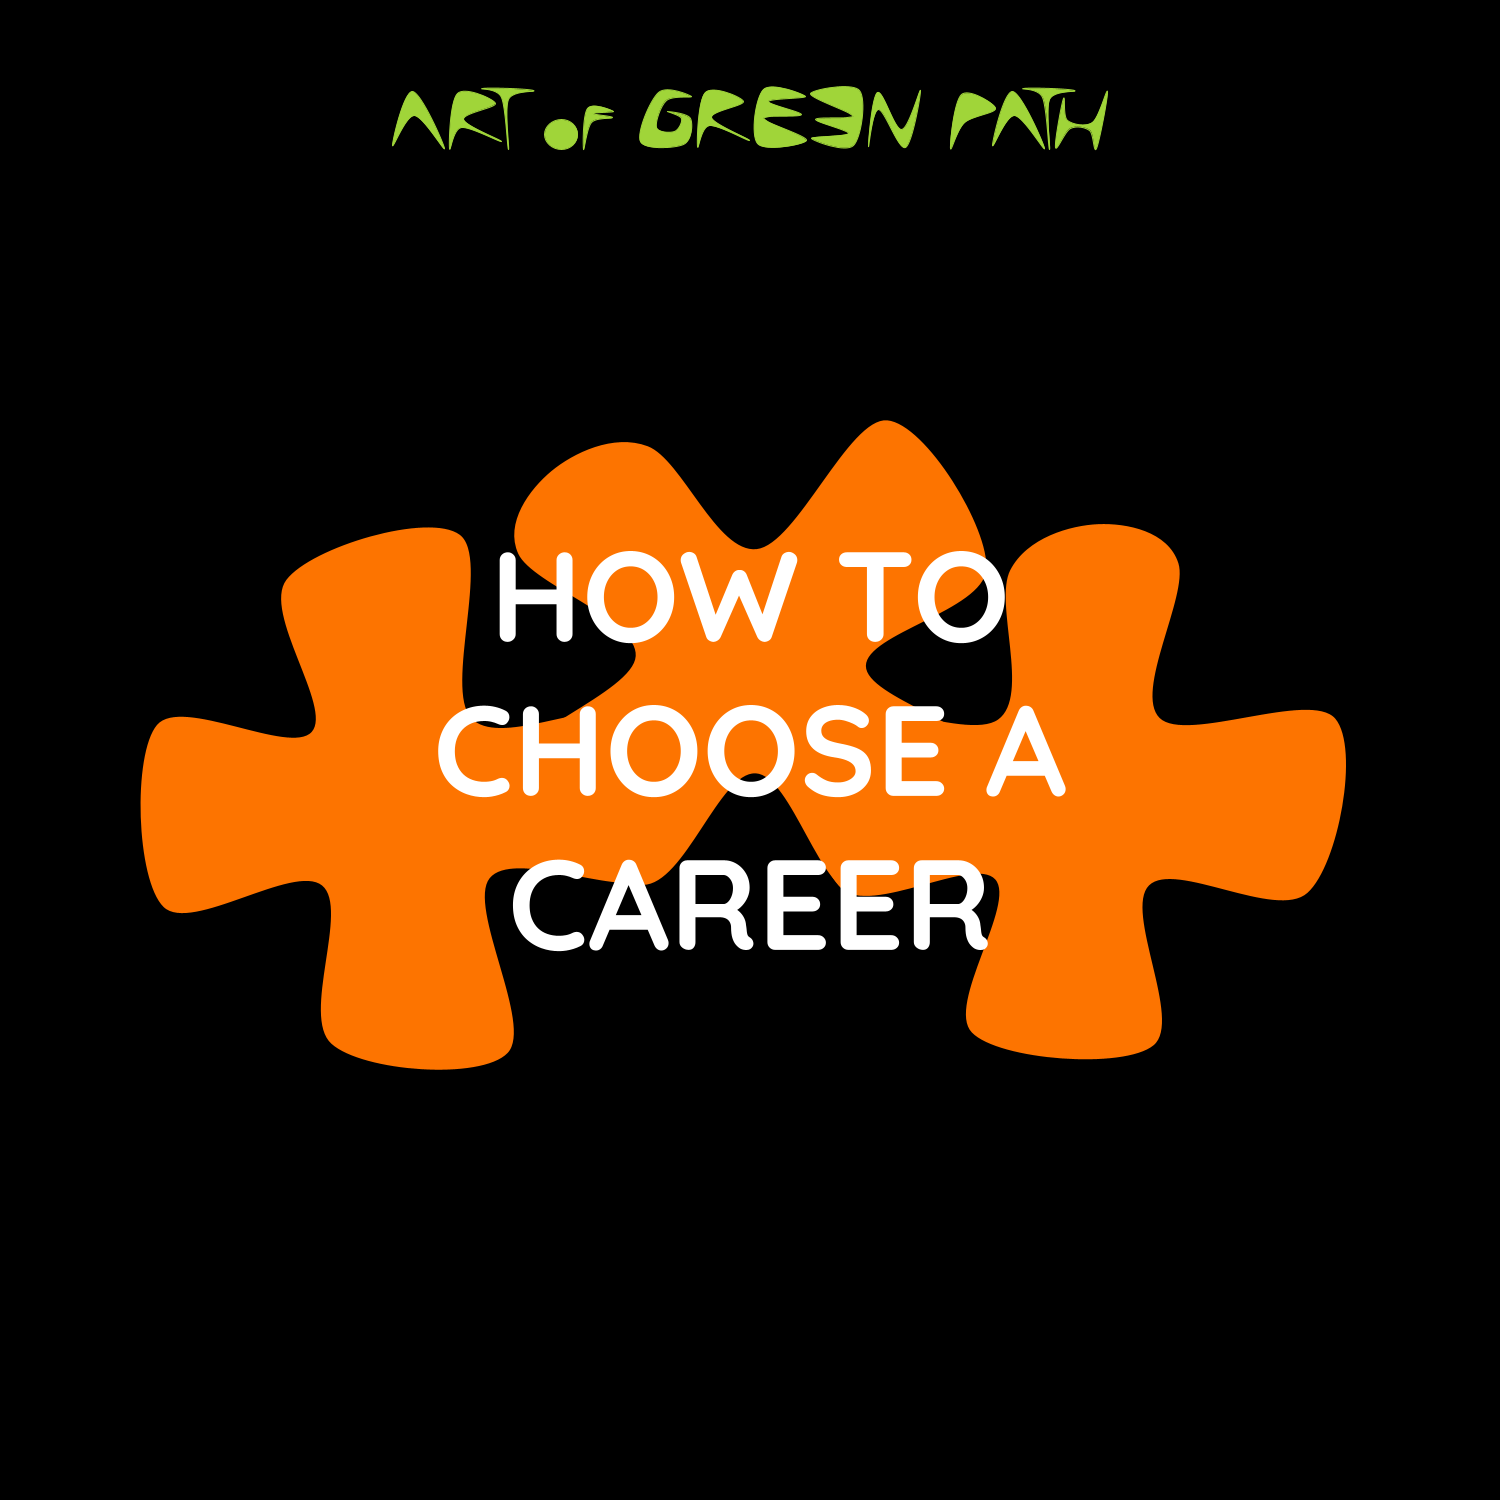 Art Of Green Path - Career Change - How To Choose A Career